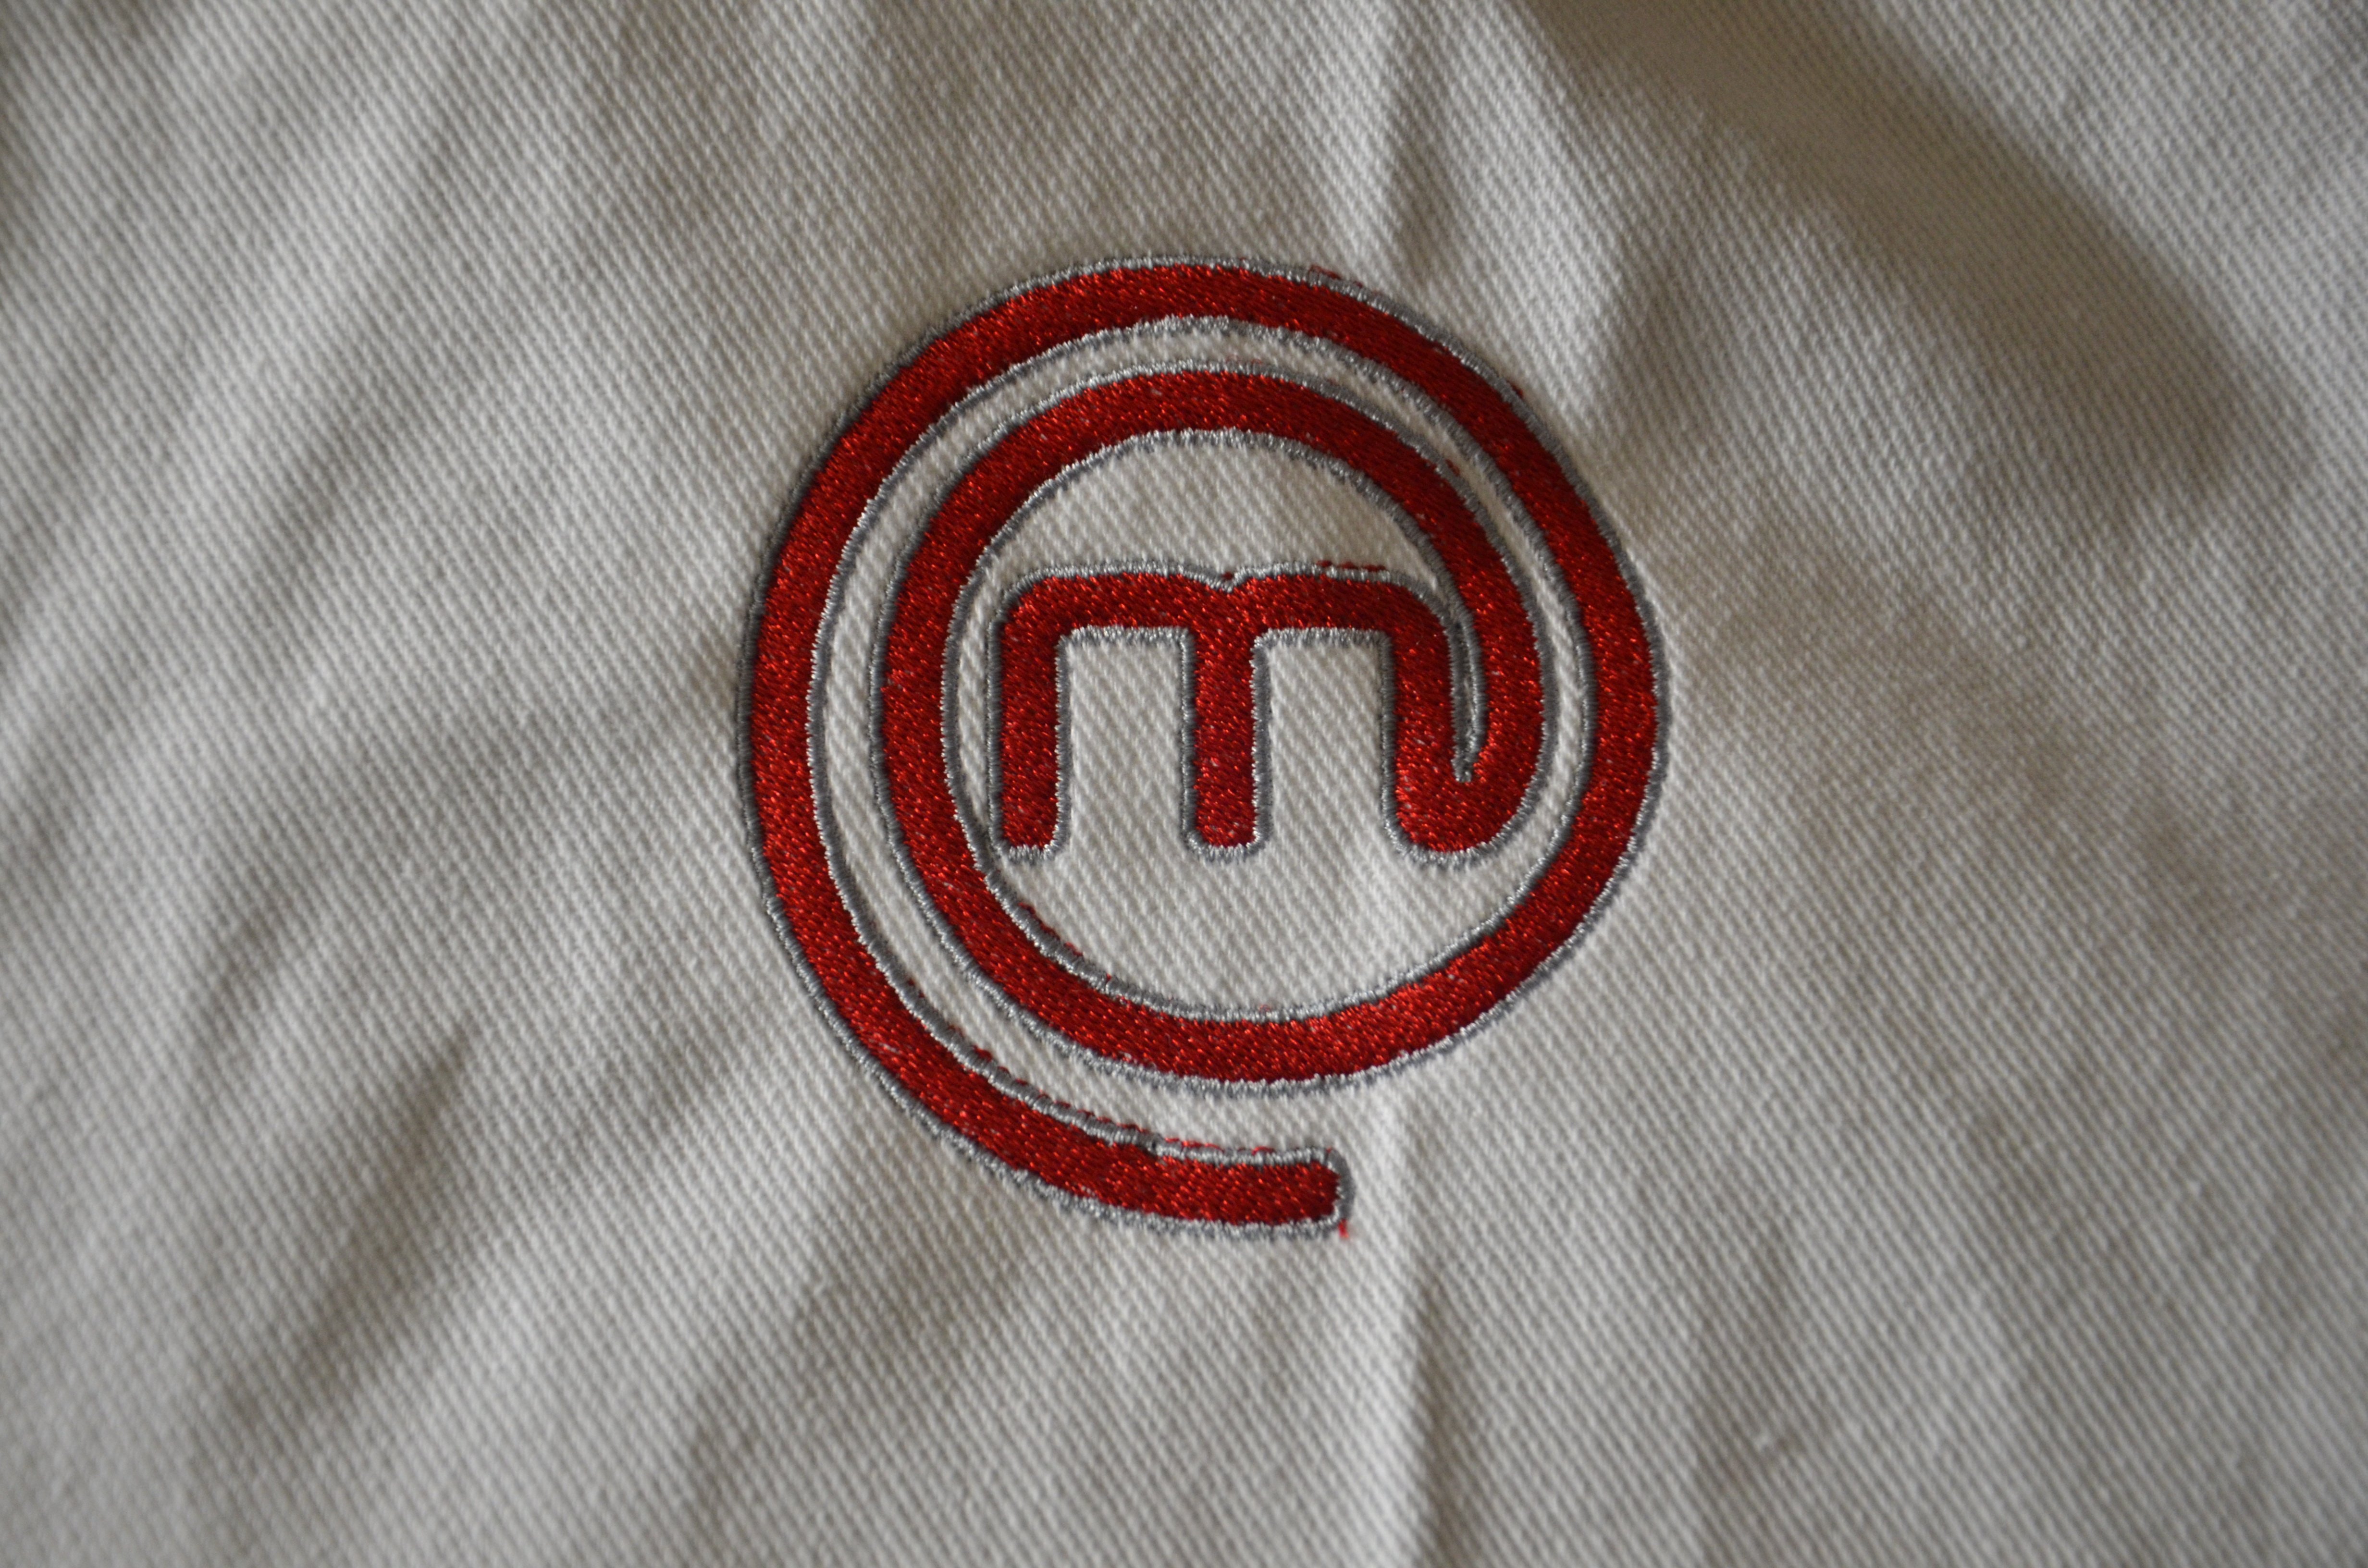 masterchef, Reality, Series, Cooking, Food, Master, Chef Wallpaper